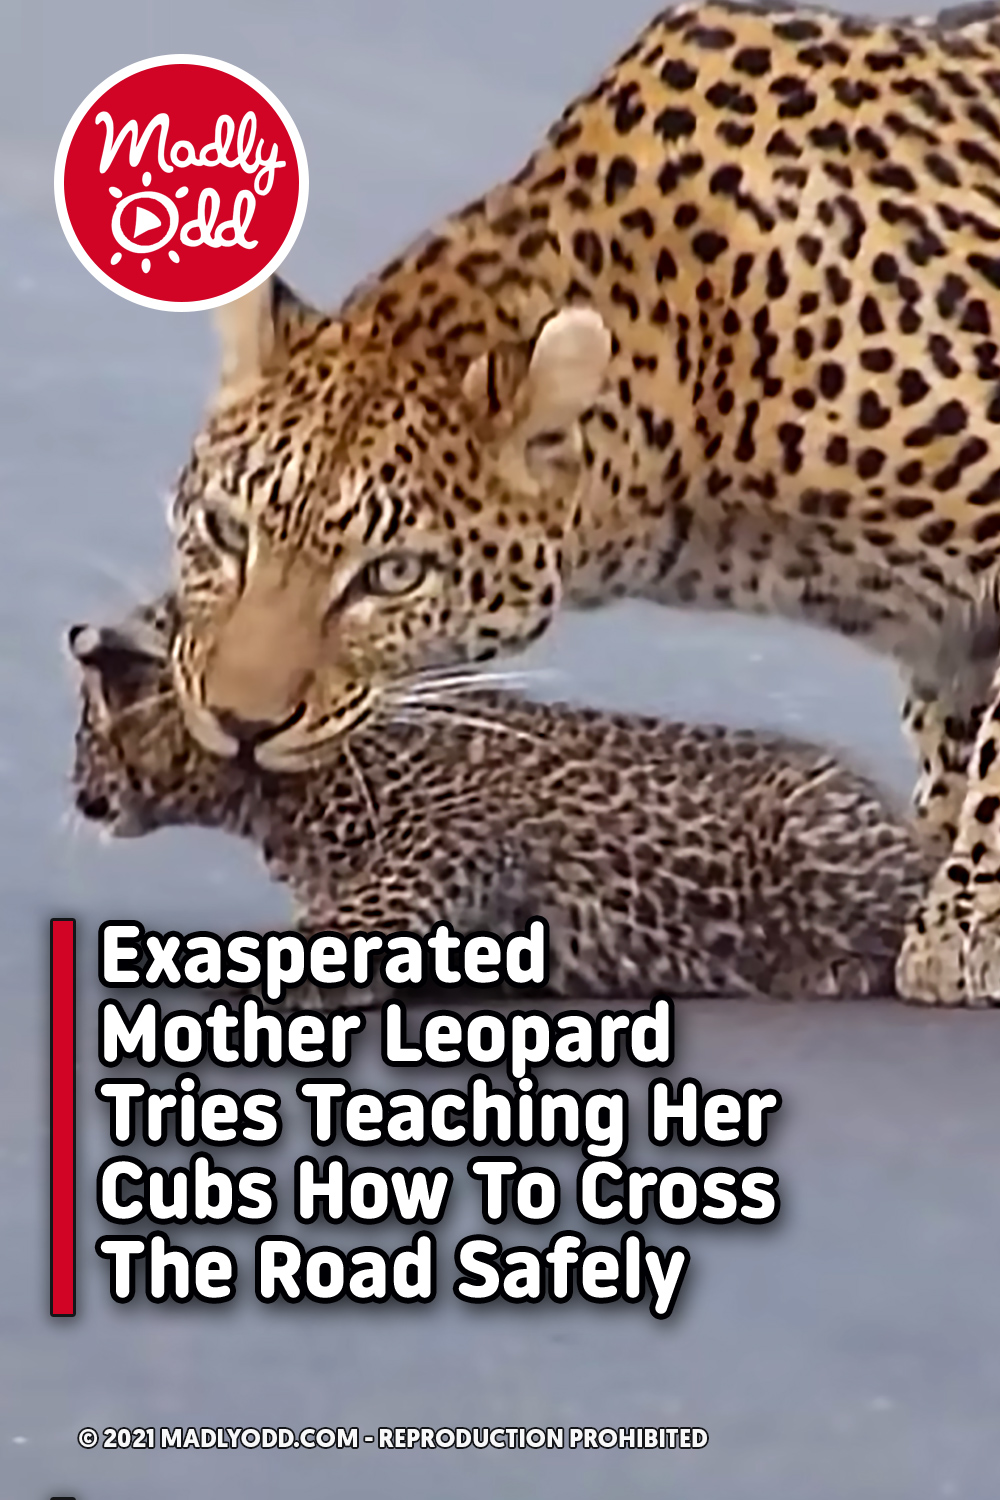 Exasperated Mother Leopard Tries Teaching Her Cubs How To Cross The Road Safely